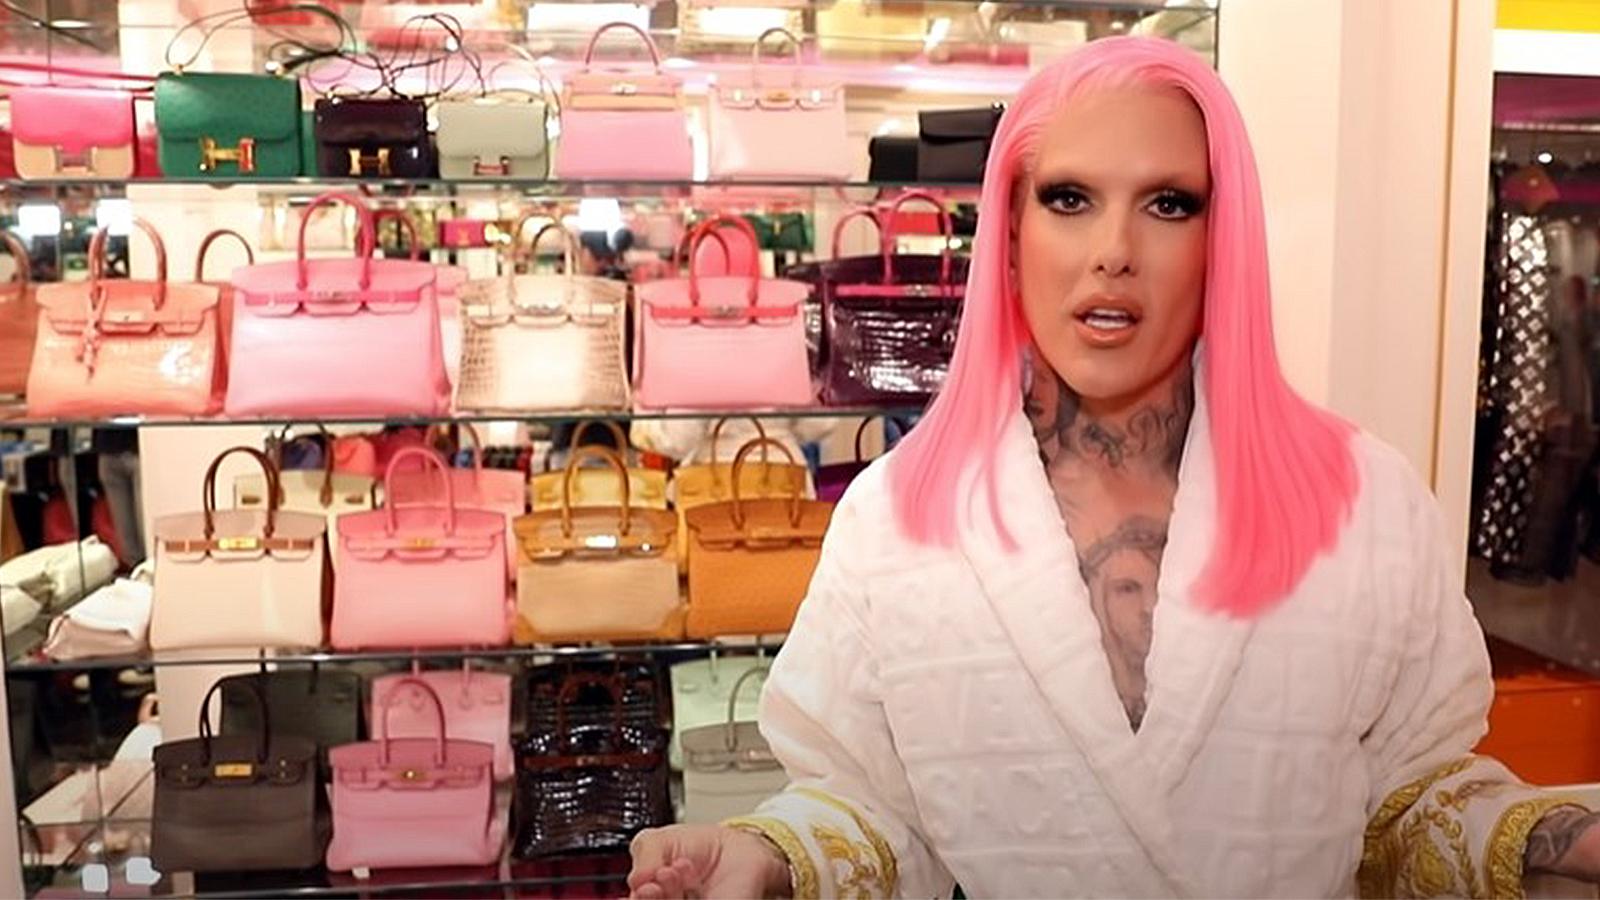 Jeffree Star made “millions” selling huge collection of Birkin